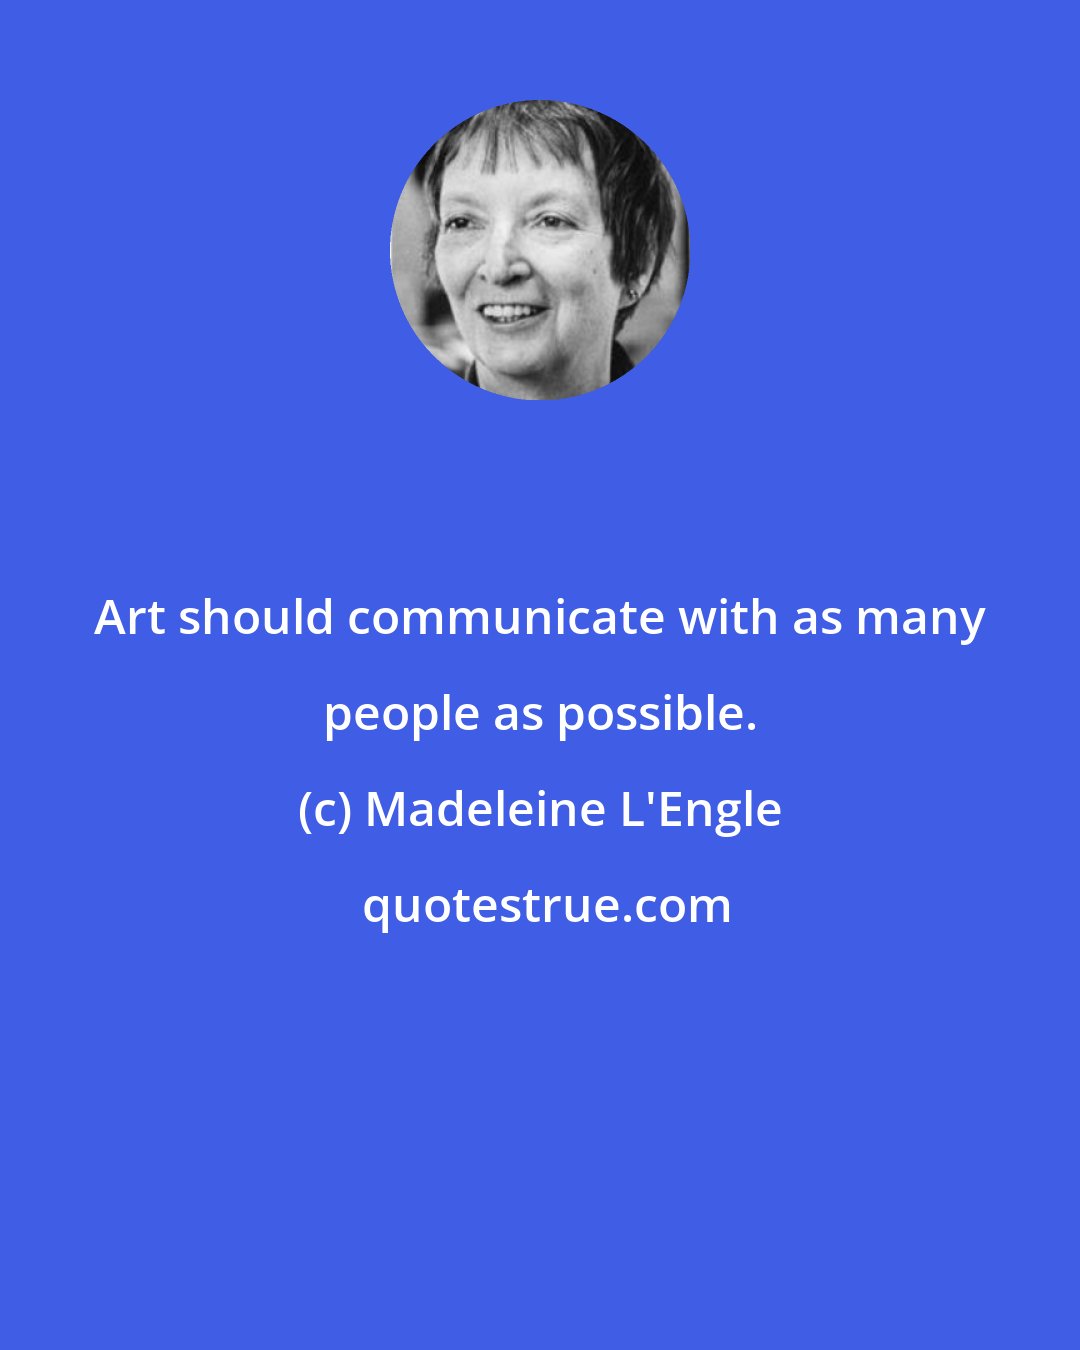 Madeleine L'Engle: Art should communicate with as many people as possible.